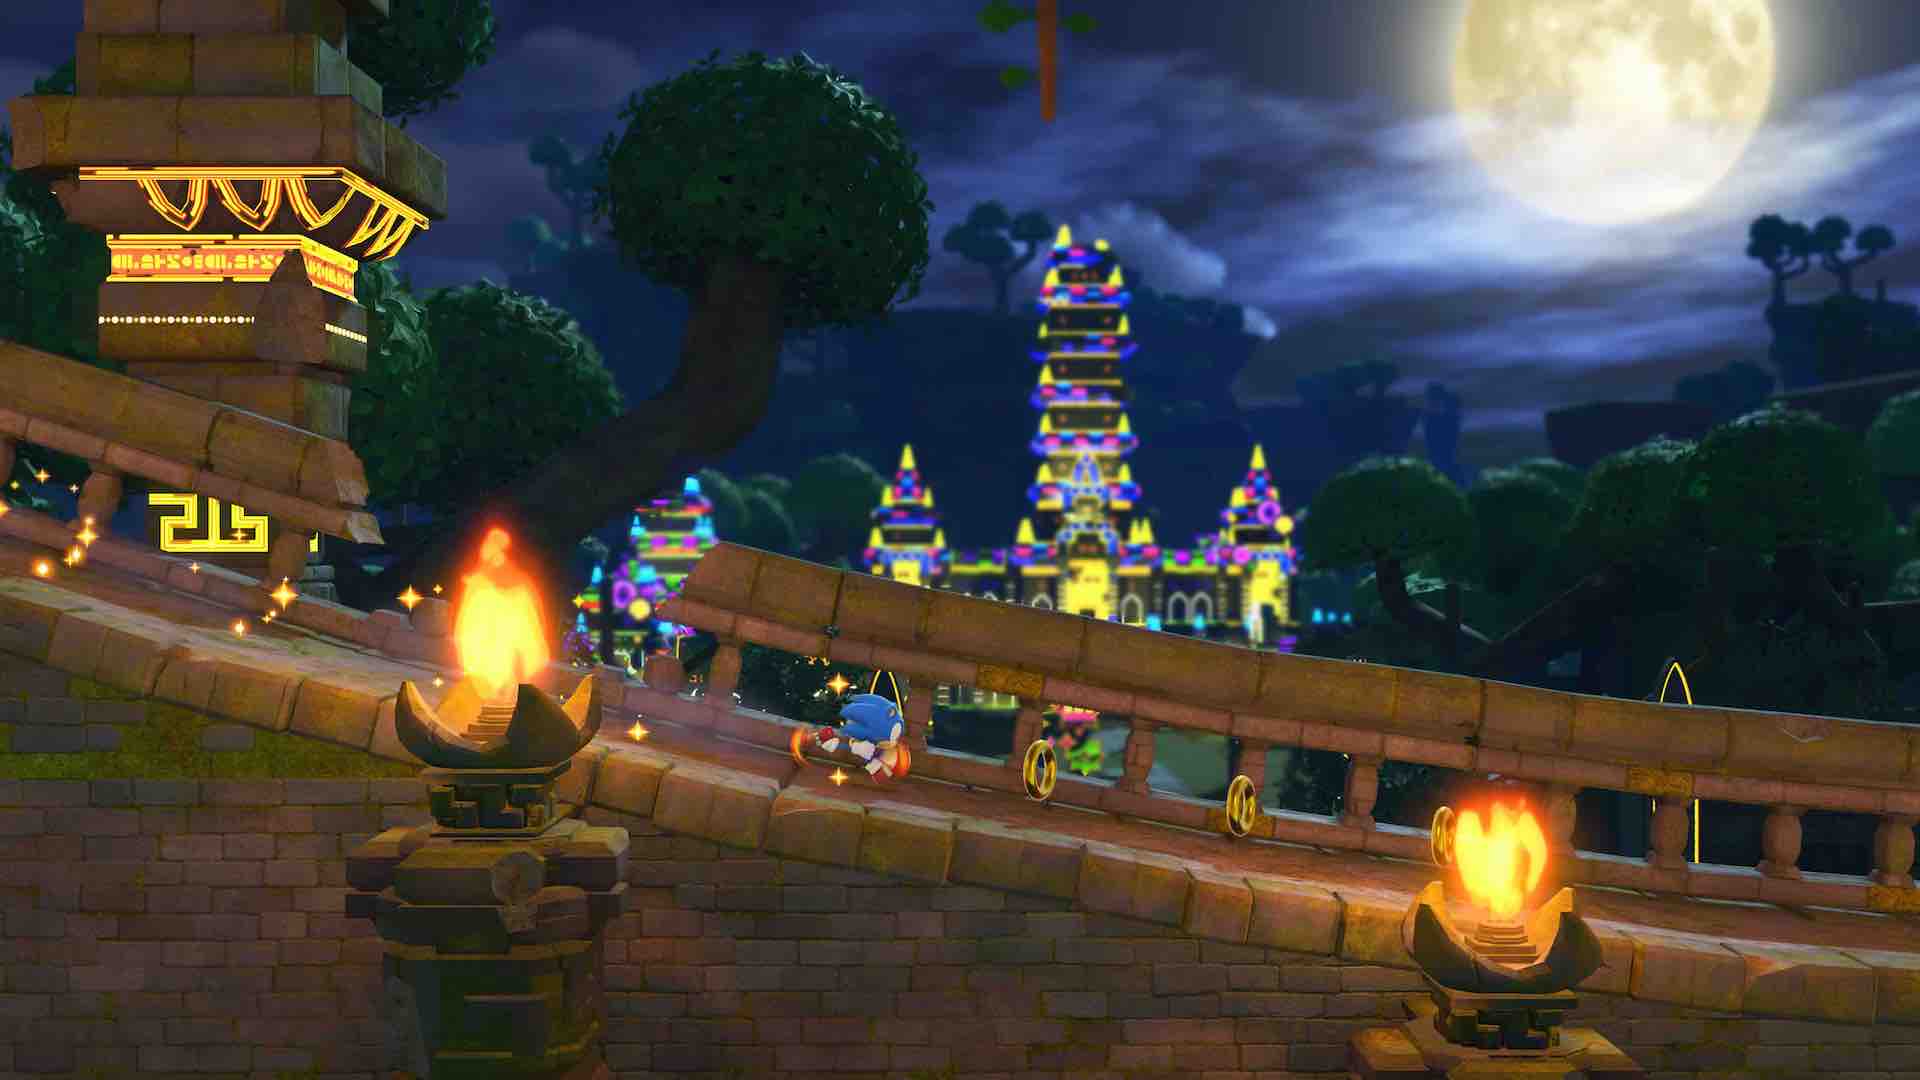 sonic-forces-casino-forest-screenshot-1